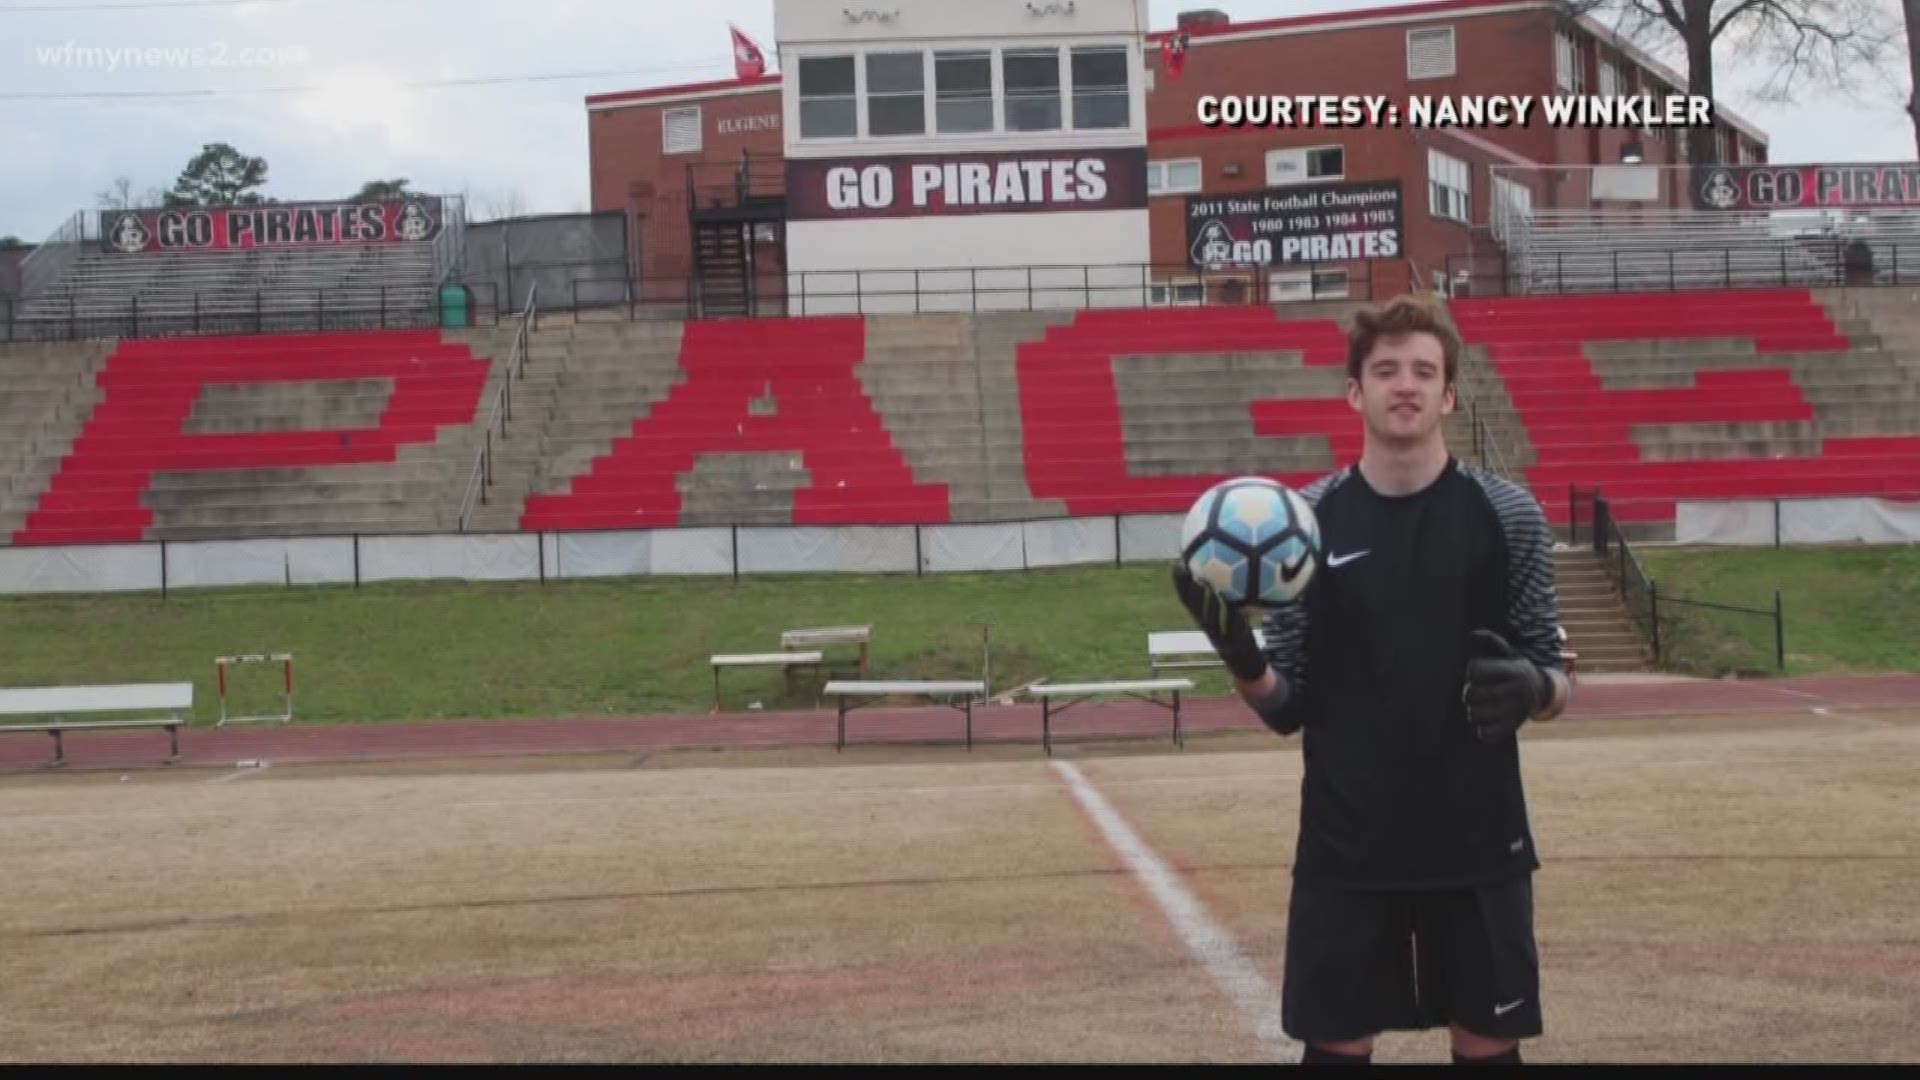 The mother of a soccer player at Page High School in Greensboro says fans heckled her son about his dead father during a game.